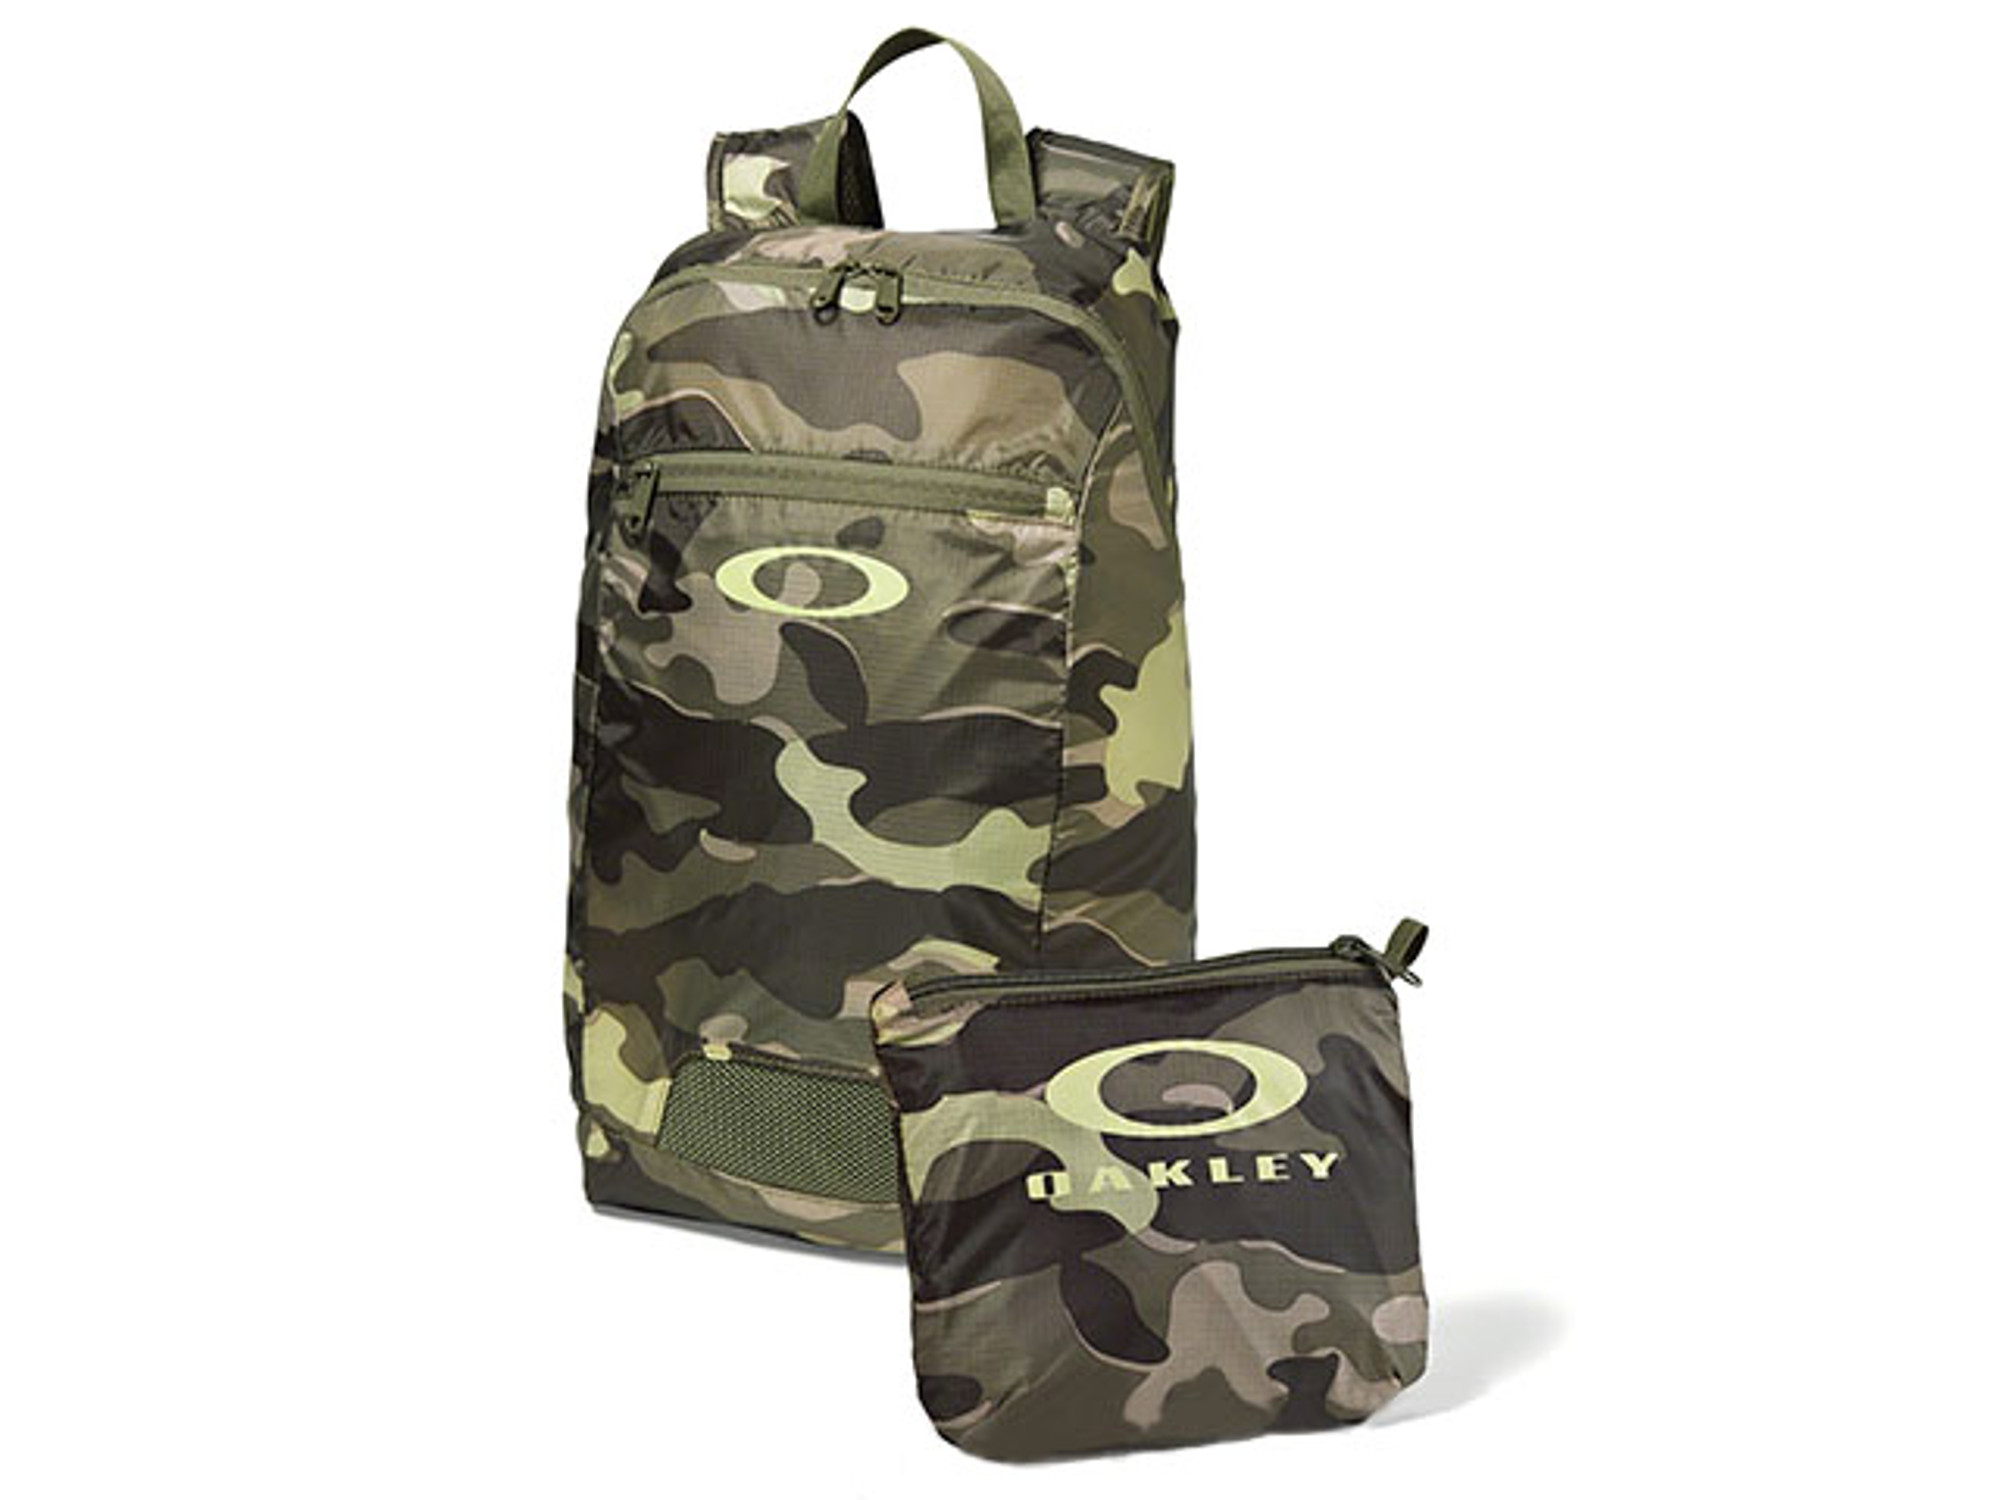 Oakley Packable Backpack - Olive Camo